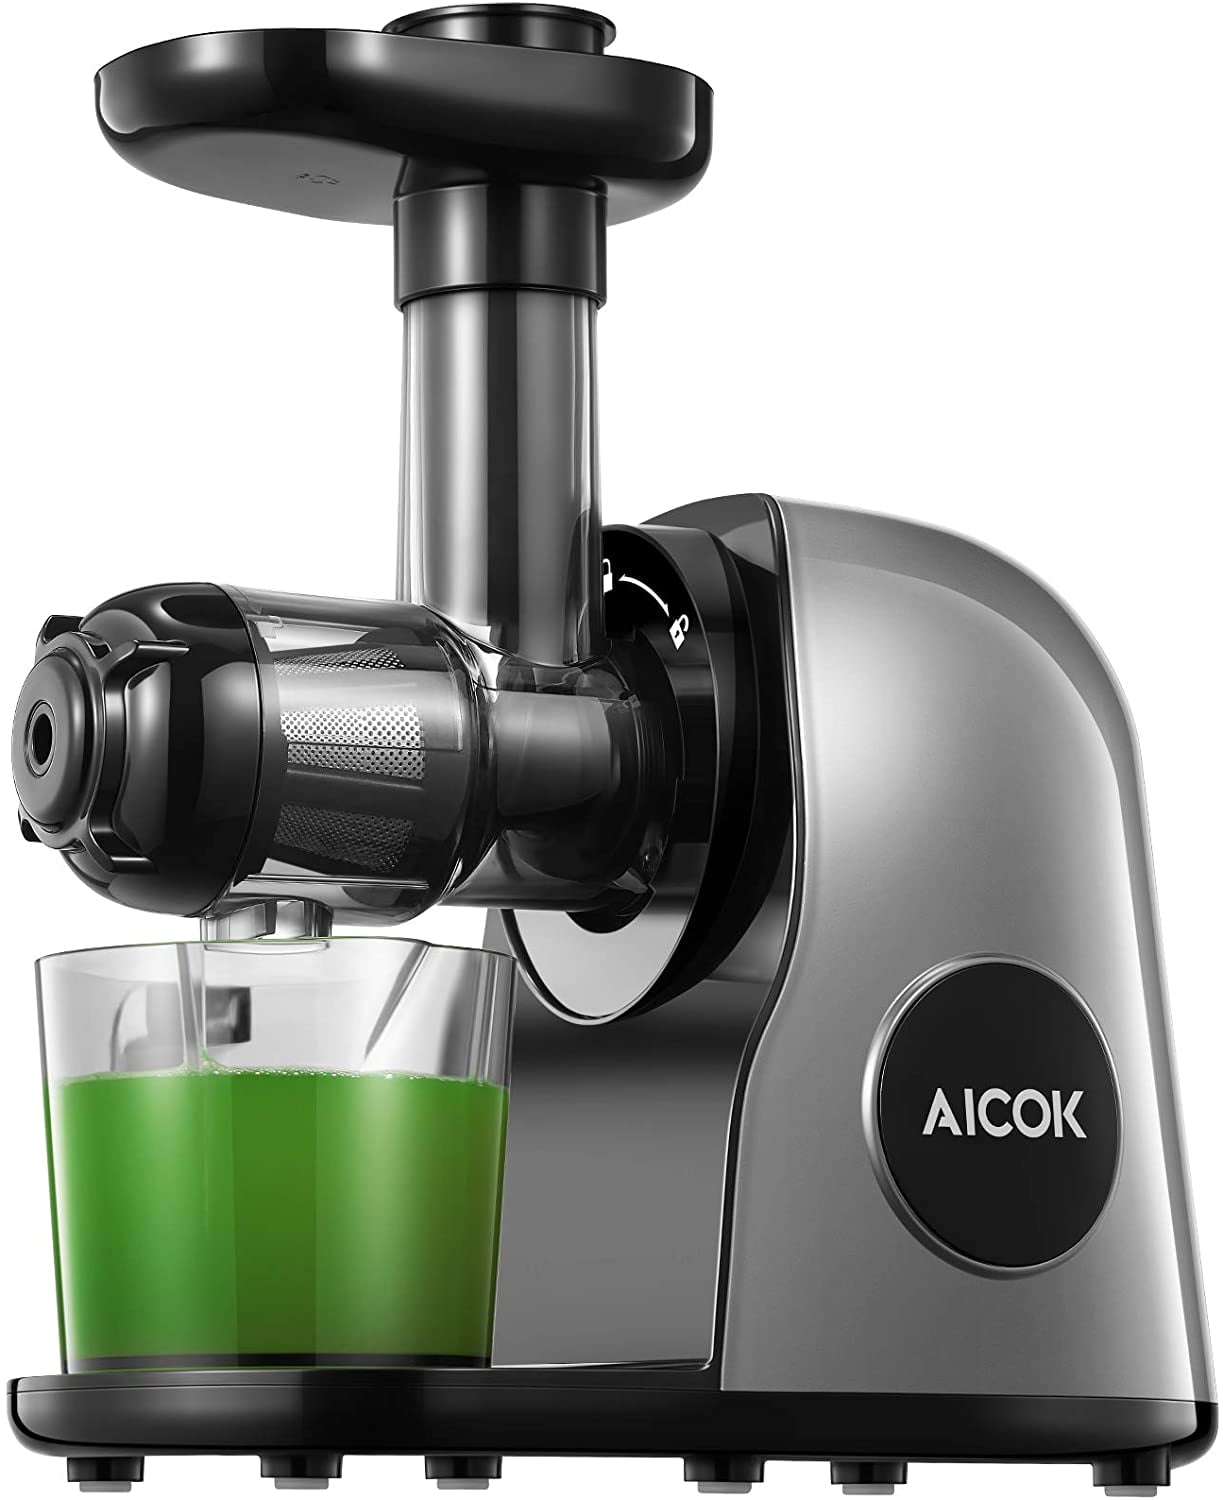 Cold Press Juicer Creates Fresh Healthy Vegetable and Fruit Juice Slow Juicer Masticating Juicer Machine Aicok Juicers Whole Fruit and Vegetable with Dual-Stage Quiet Motor & Reverse Function 